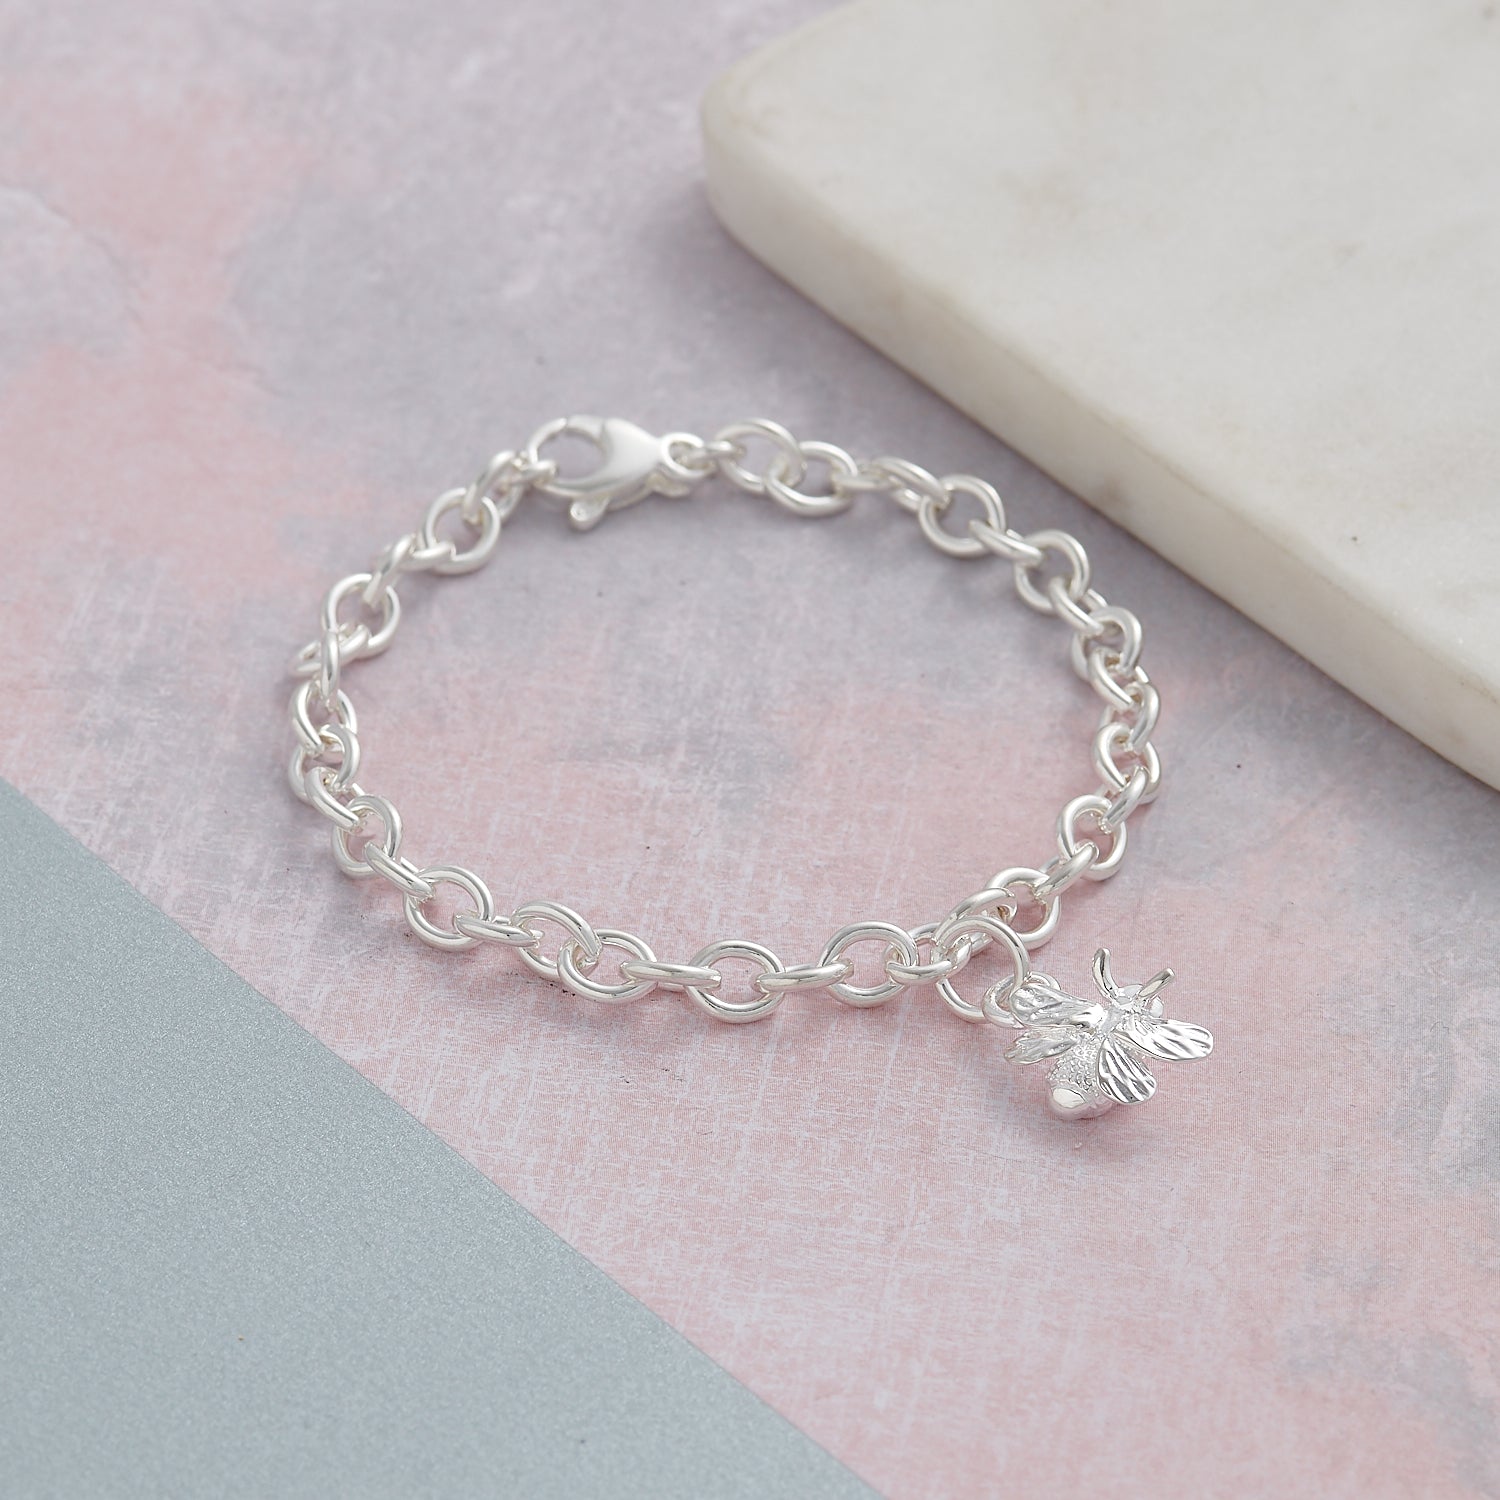 Bumble-Bee Adjustable Solid Silver Charm Bracelet Scarlett Jewellery Nature